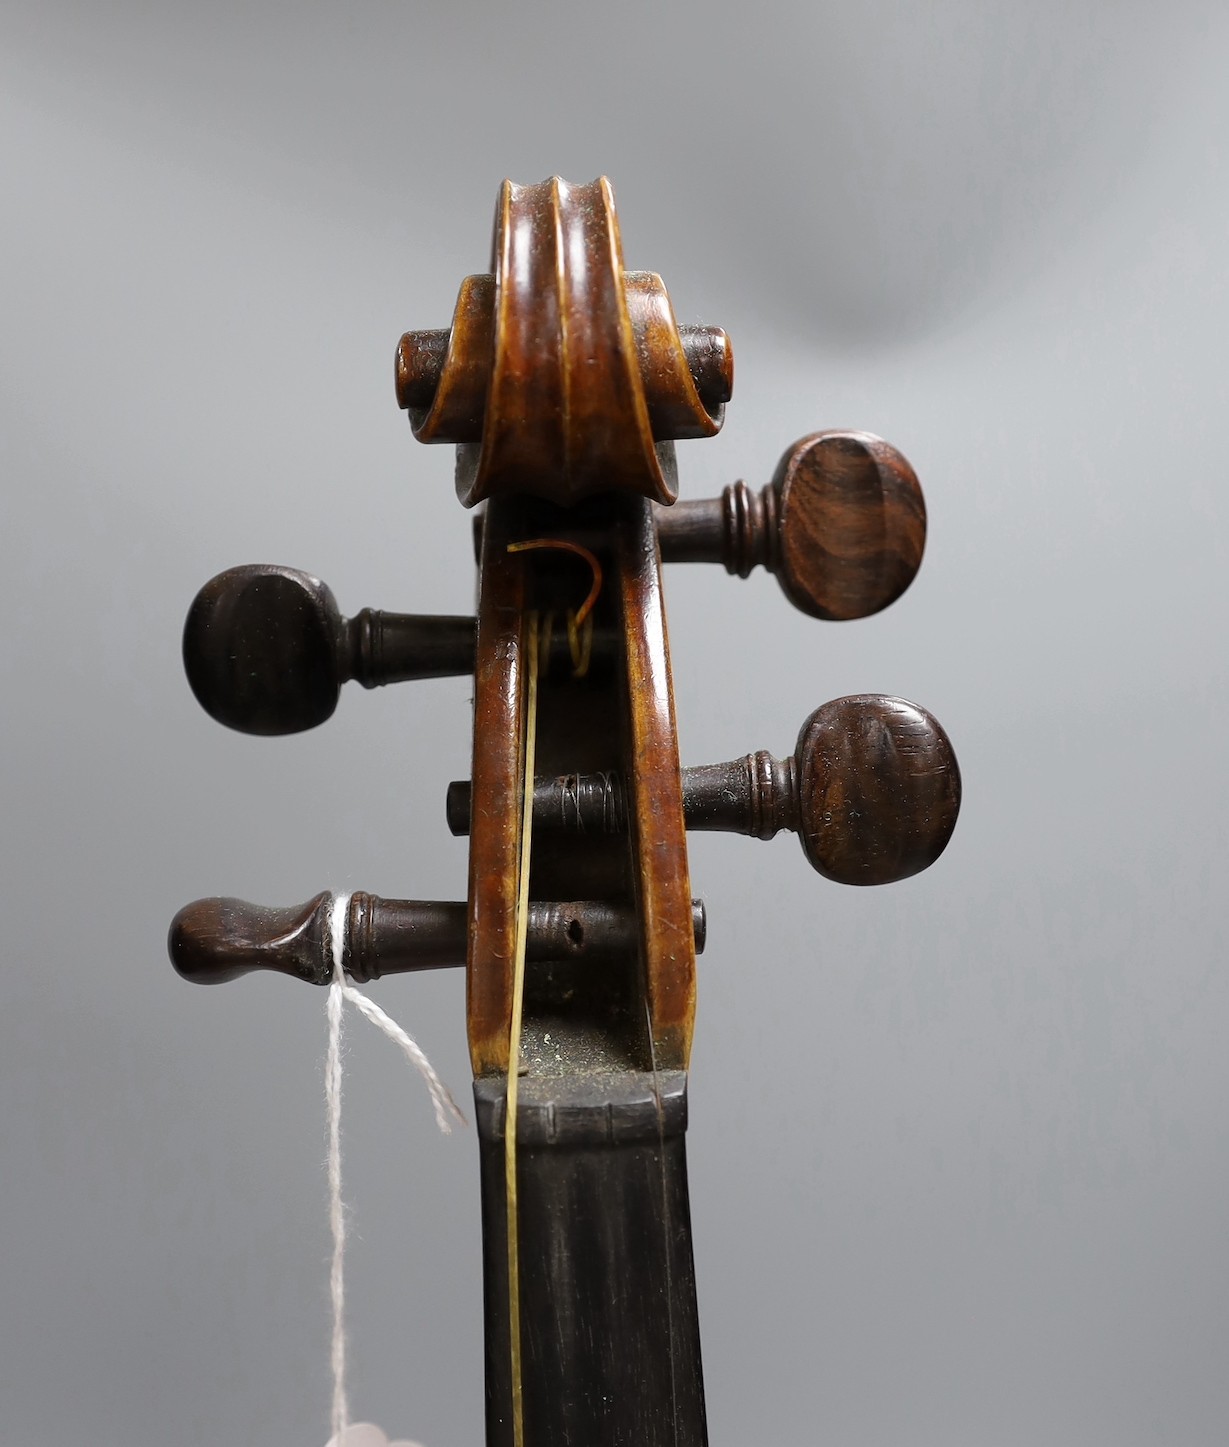 A cased late 19th century English violin, inscribed W. Heaton maker 1887 (?), back measures 35.5cm excl button